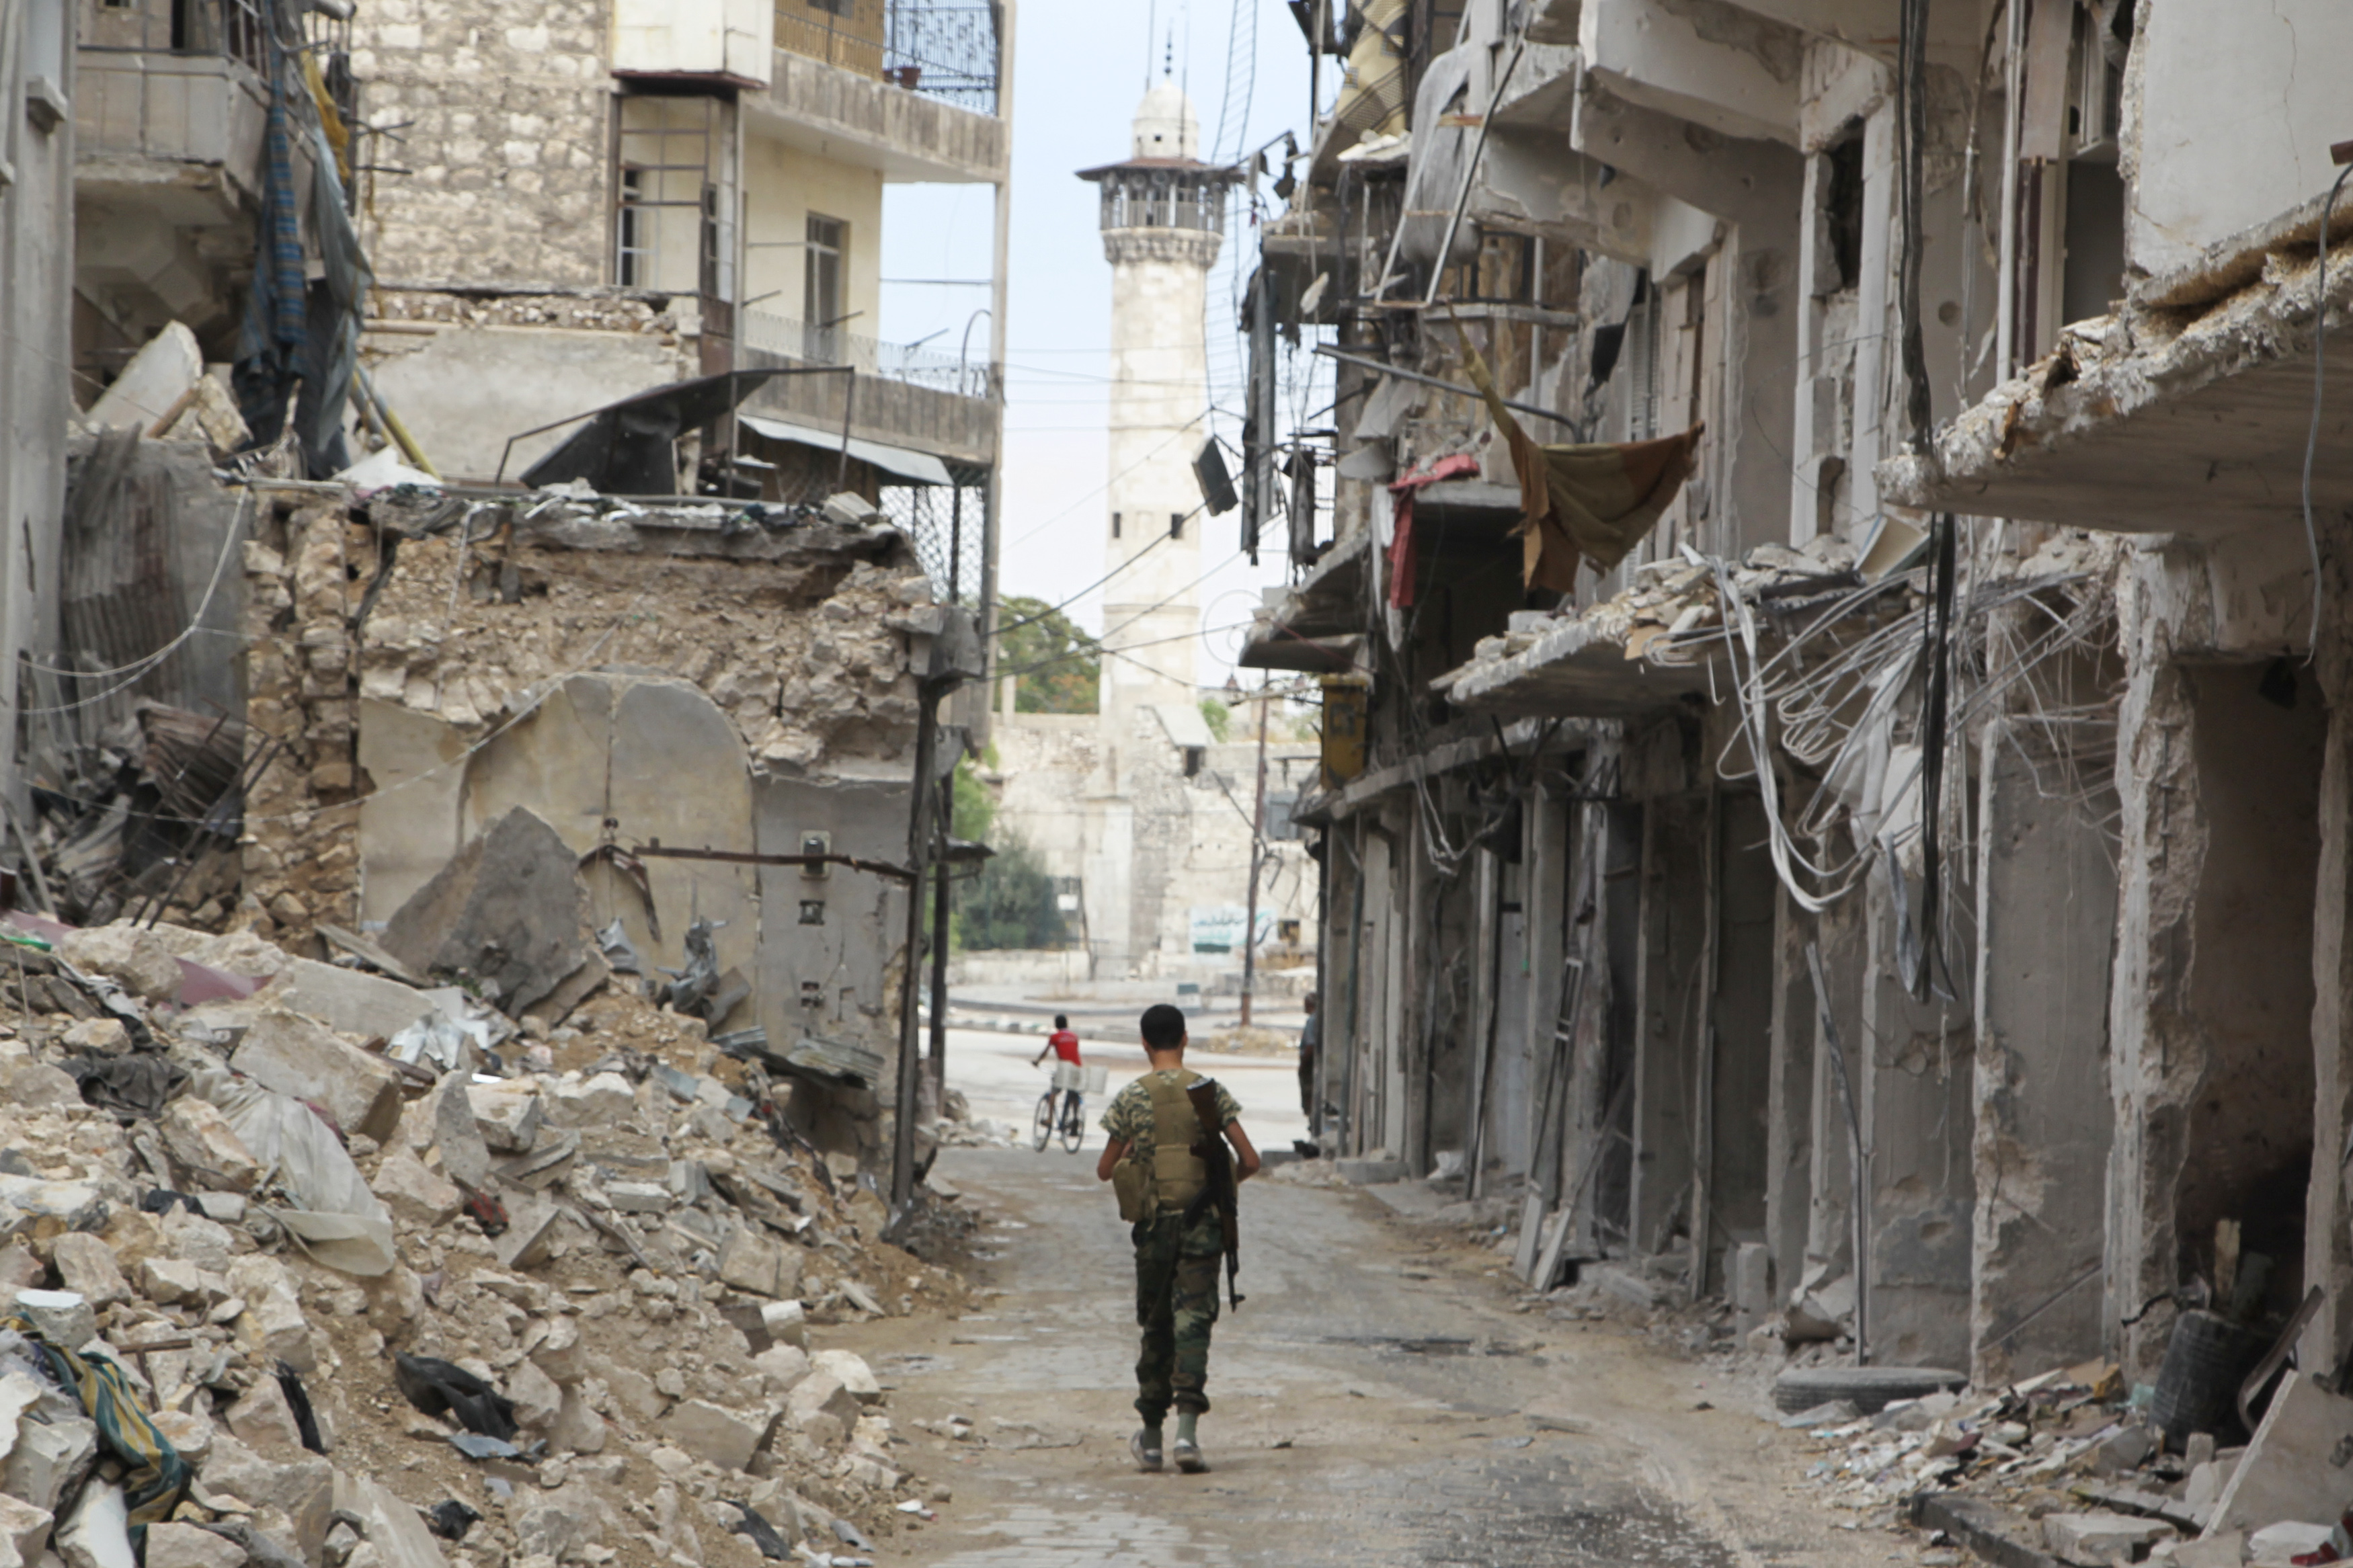 Aleppo Residents Start to Escape from Trapped Neighborhoods Through Safe Passage